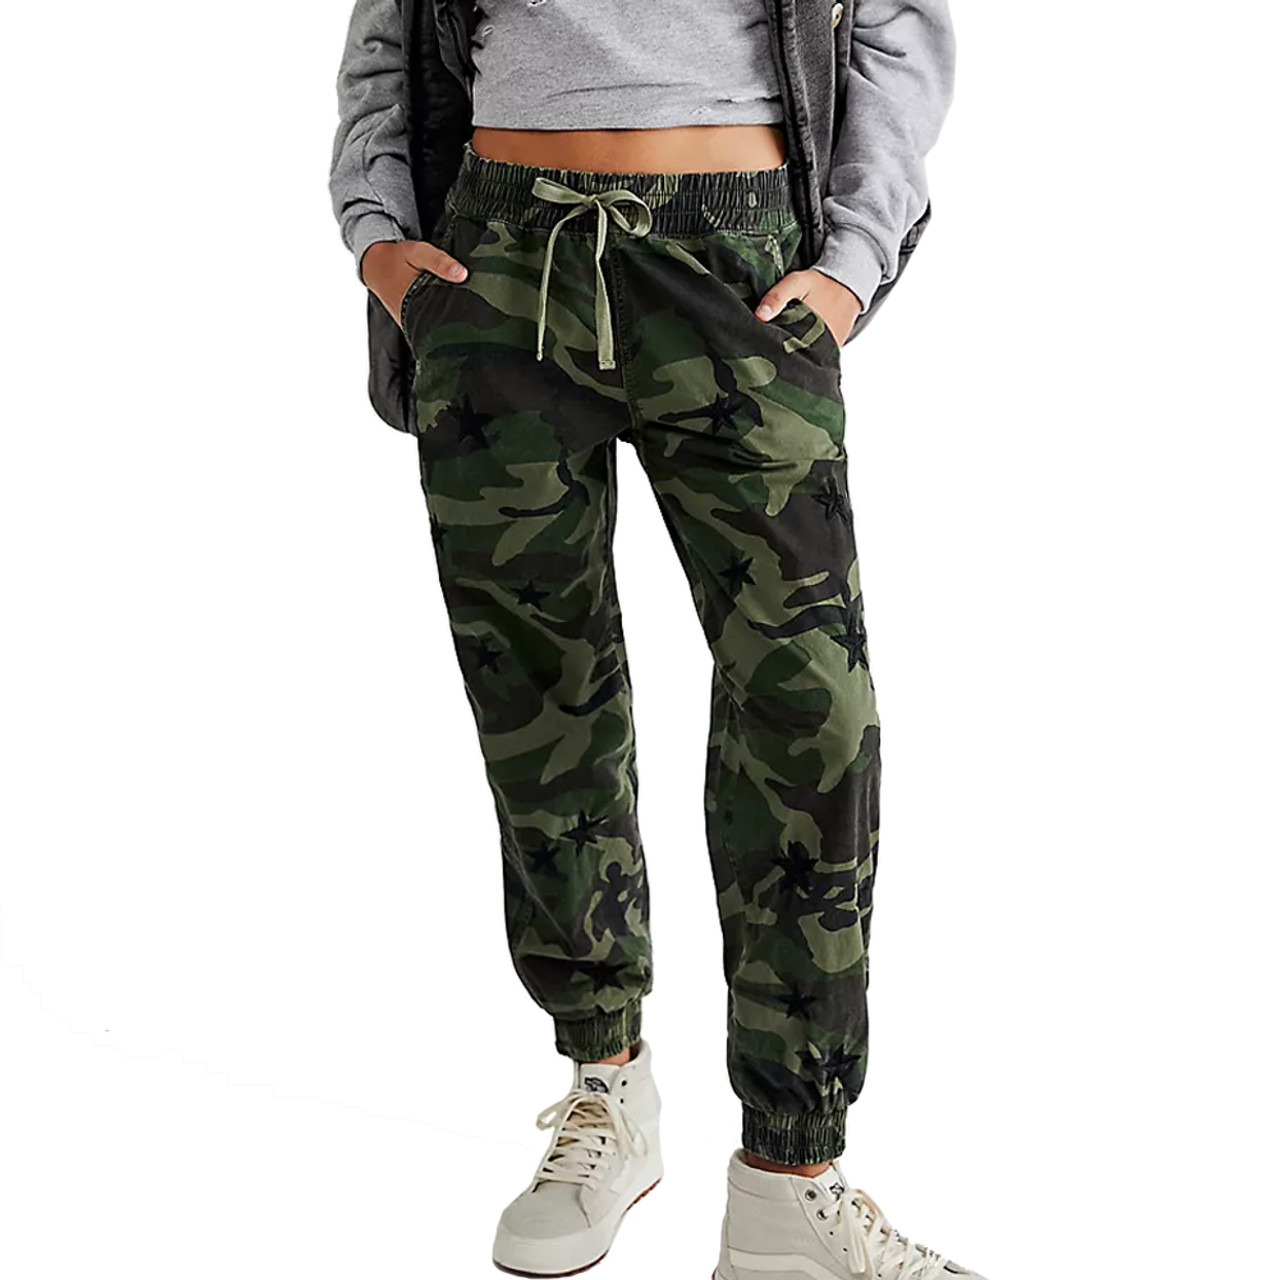 Distressed Camo Joggers, Roadtrip Outfit